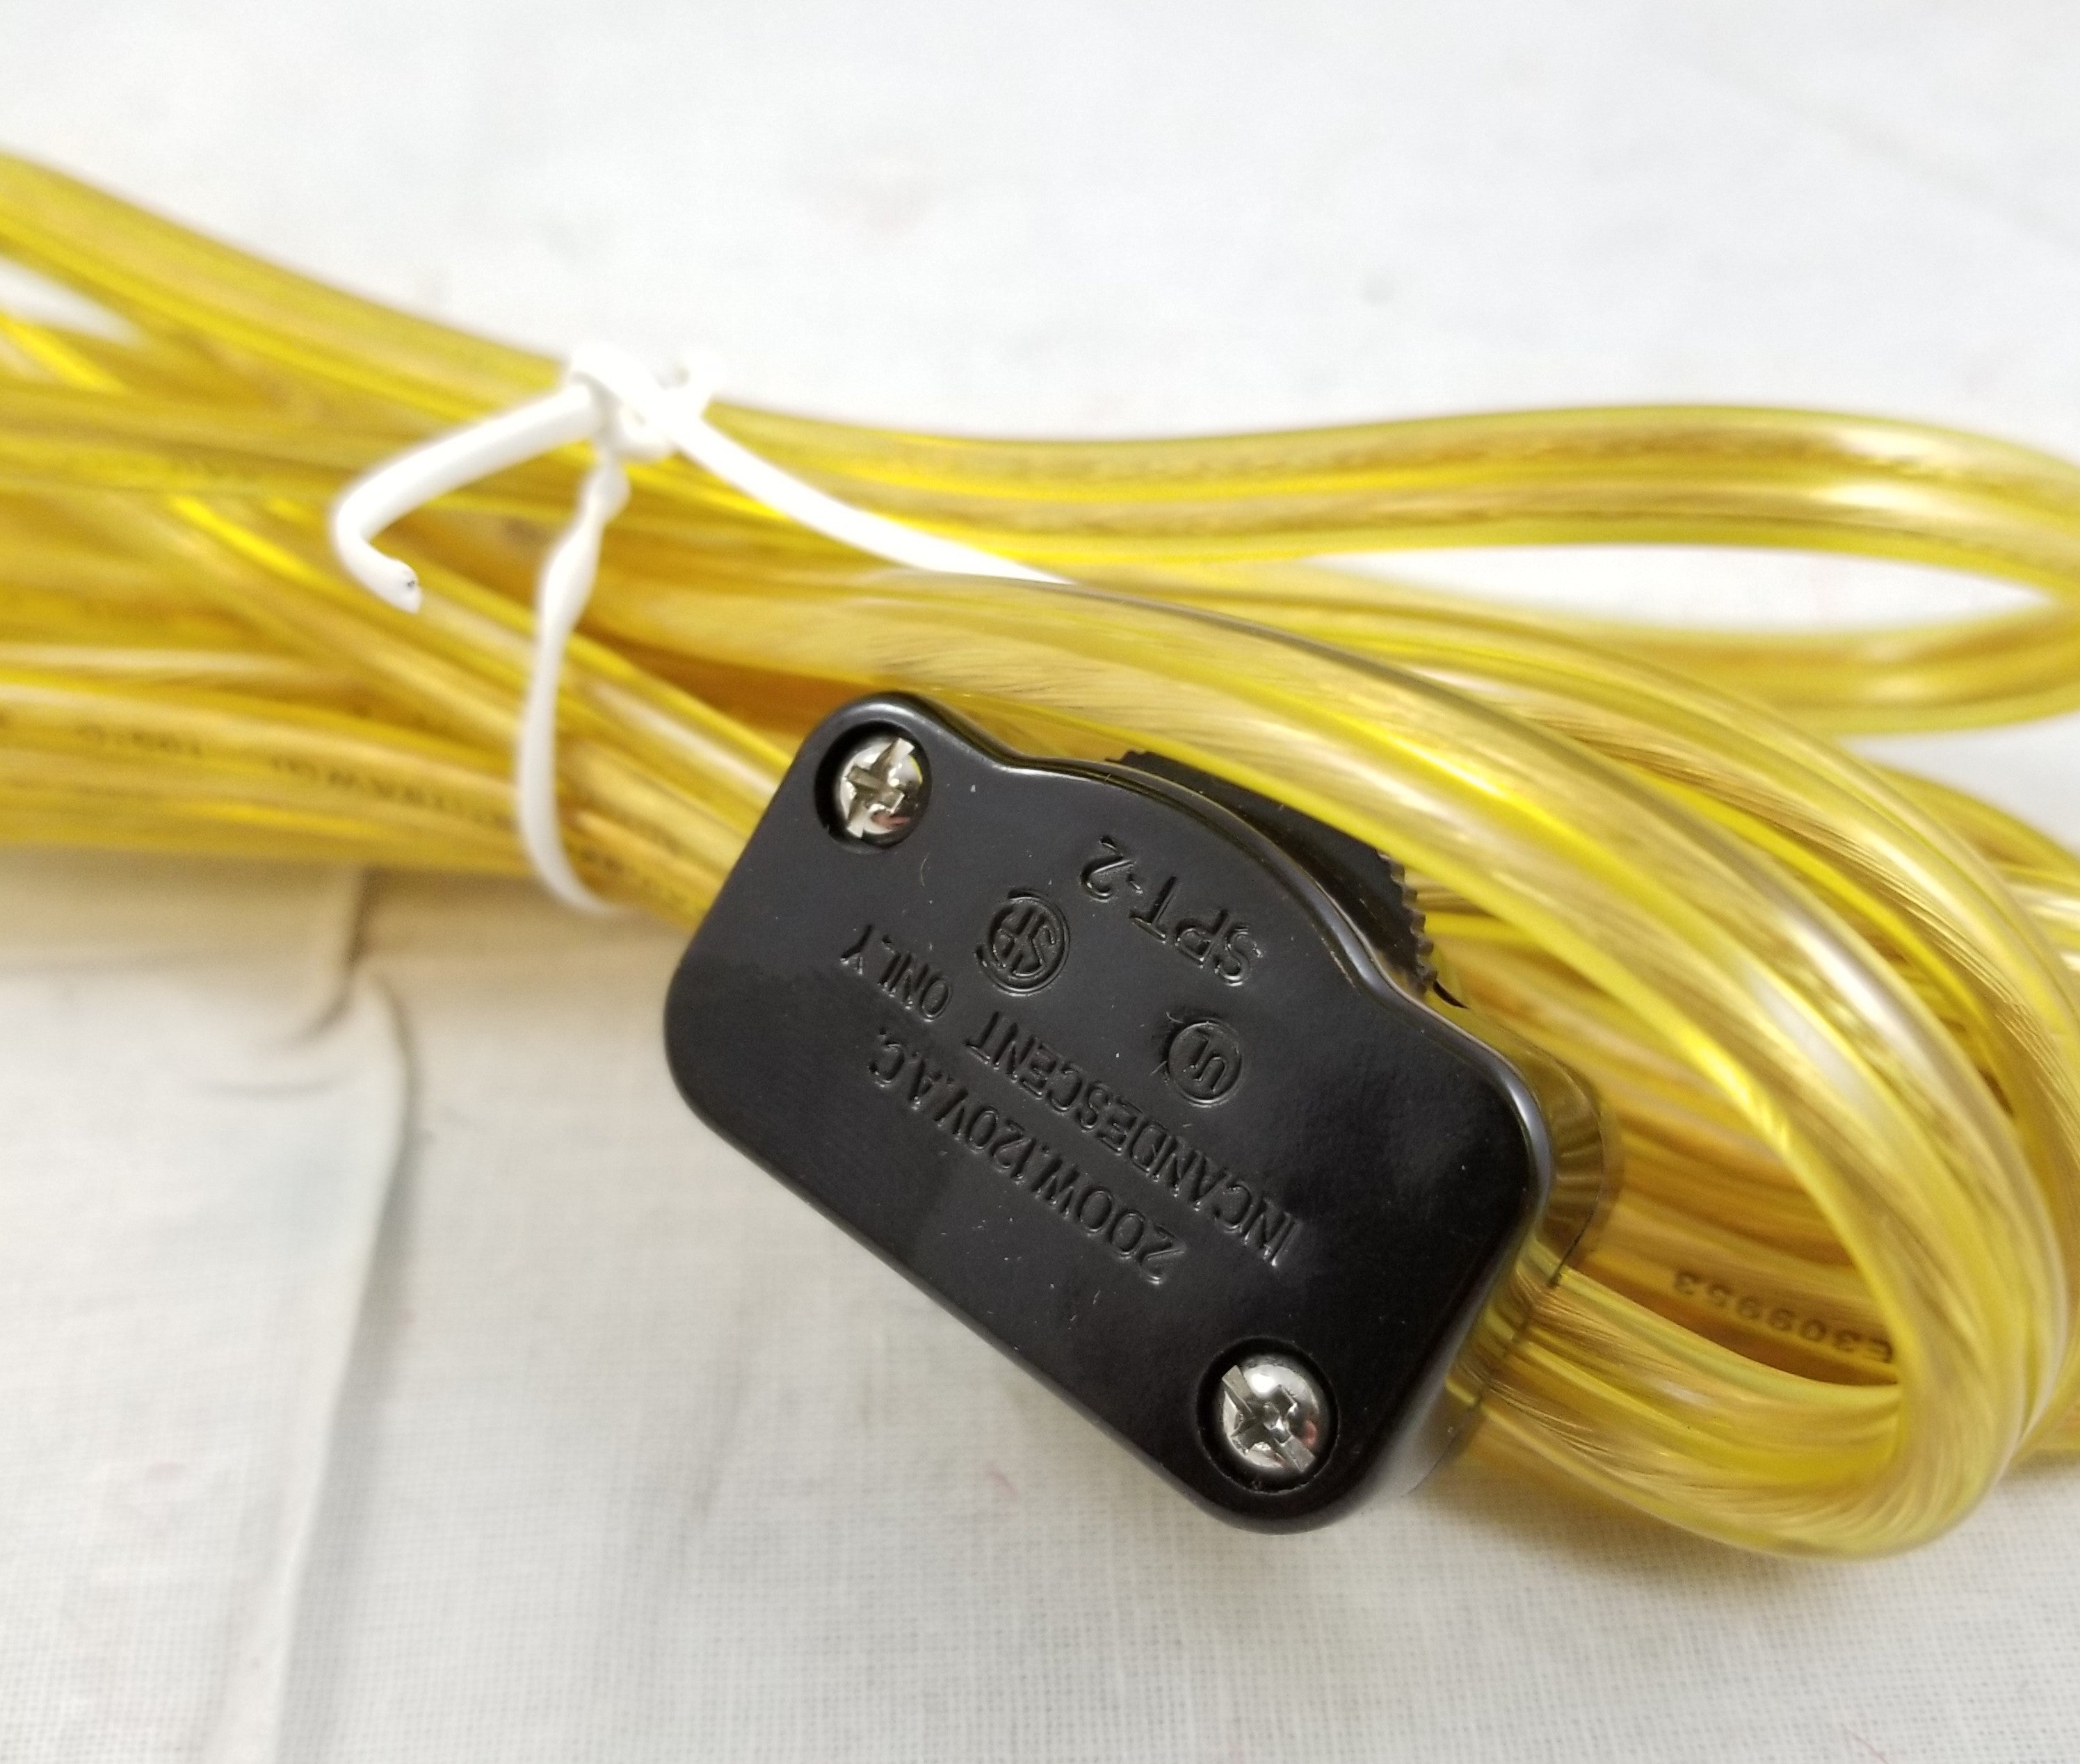 8ft Gold Cord Set - SPT2 - with Brown Hi-Low Switch